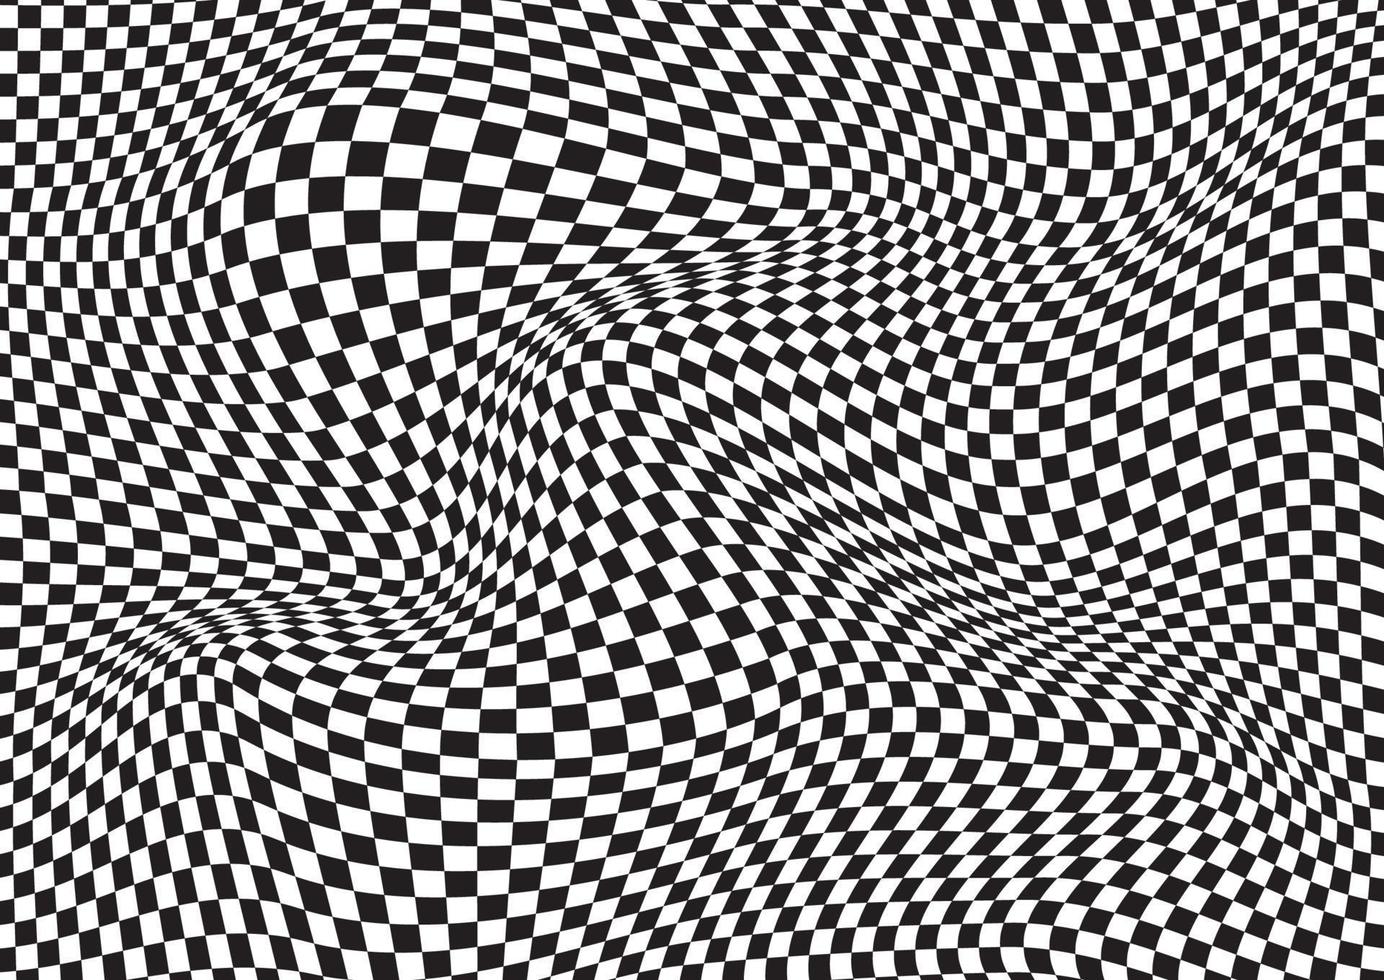 abstract optical illusion checker board background vector